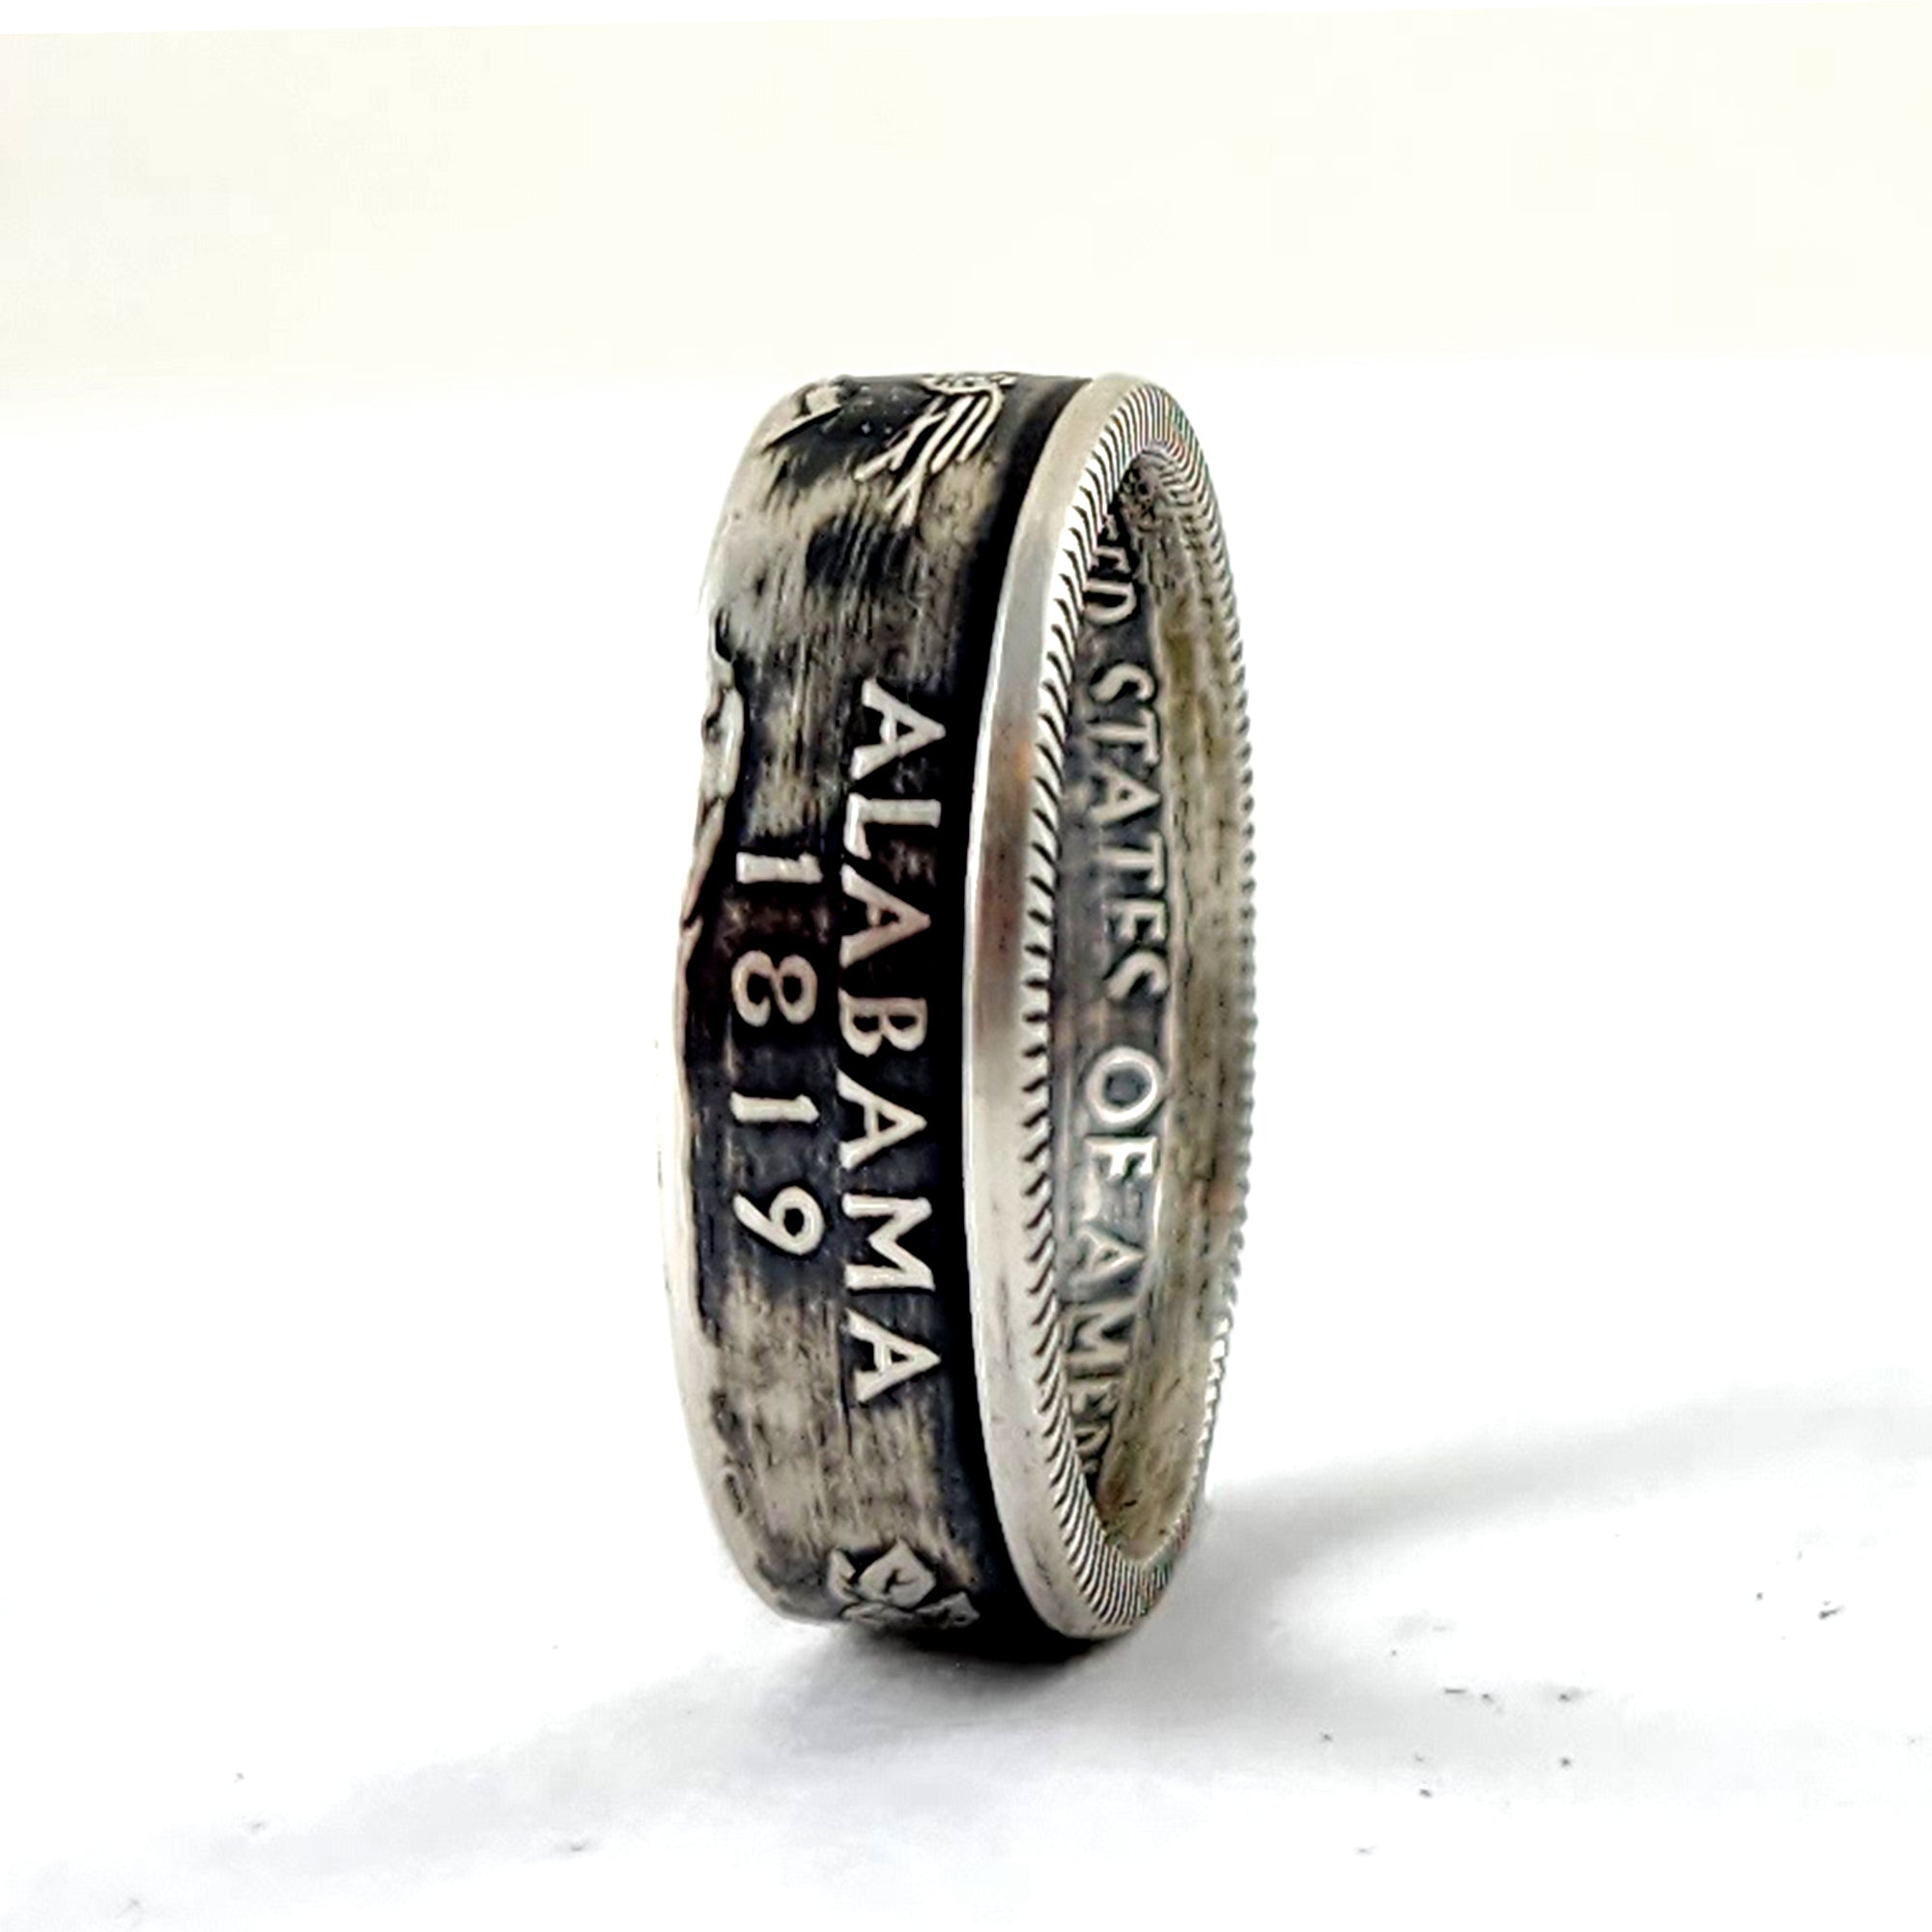 90% Silver Saratoga National Park Coin Ring by Midnight Jo